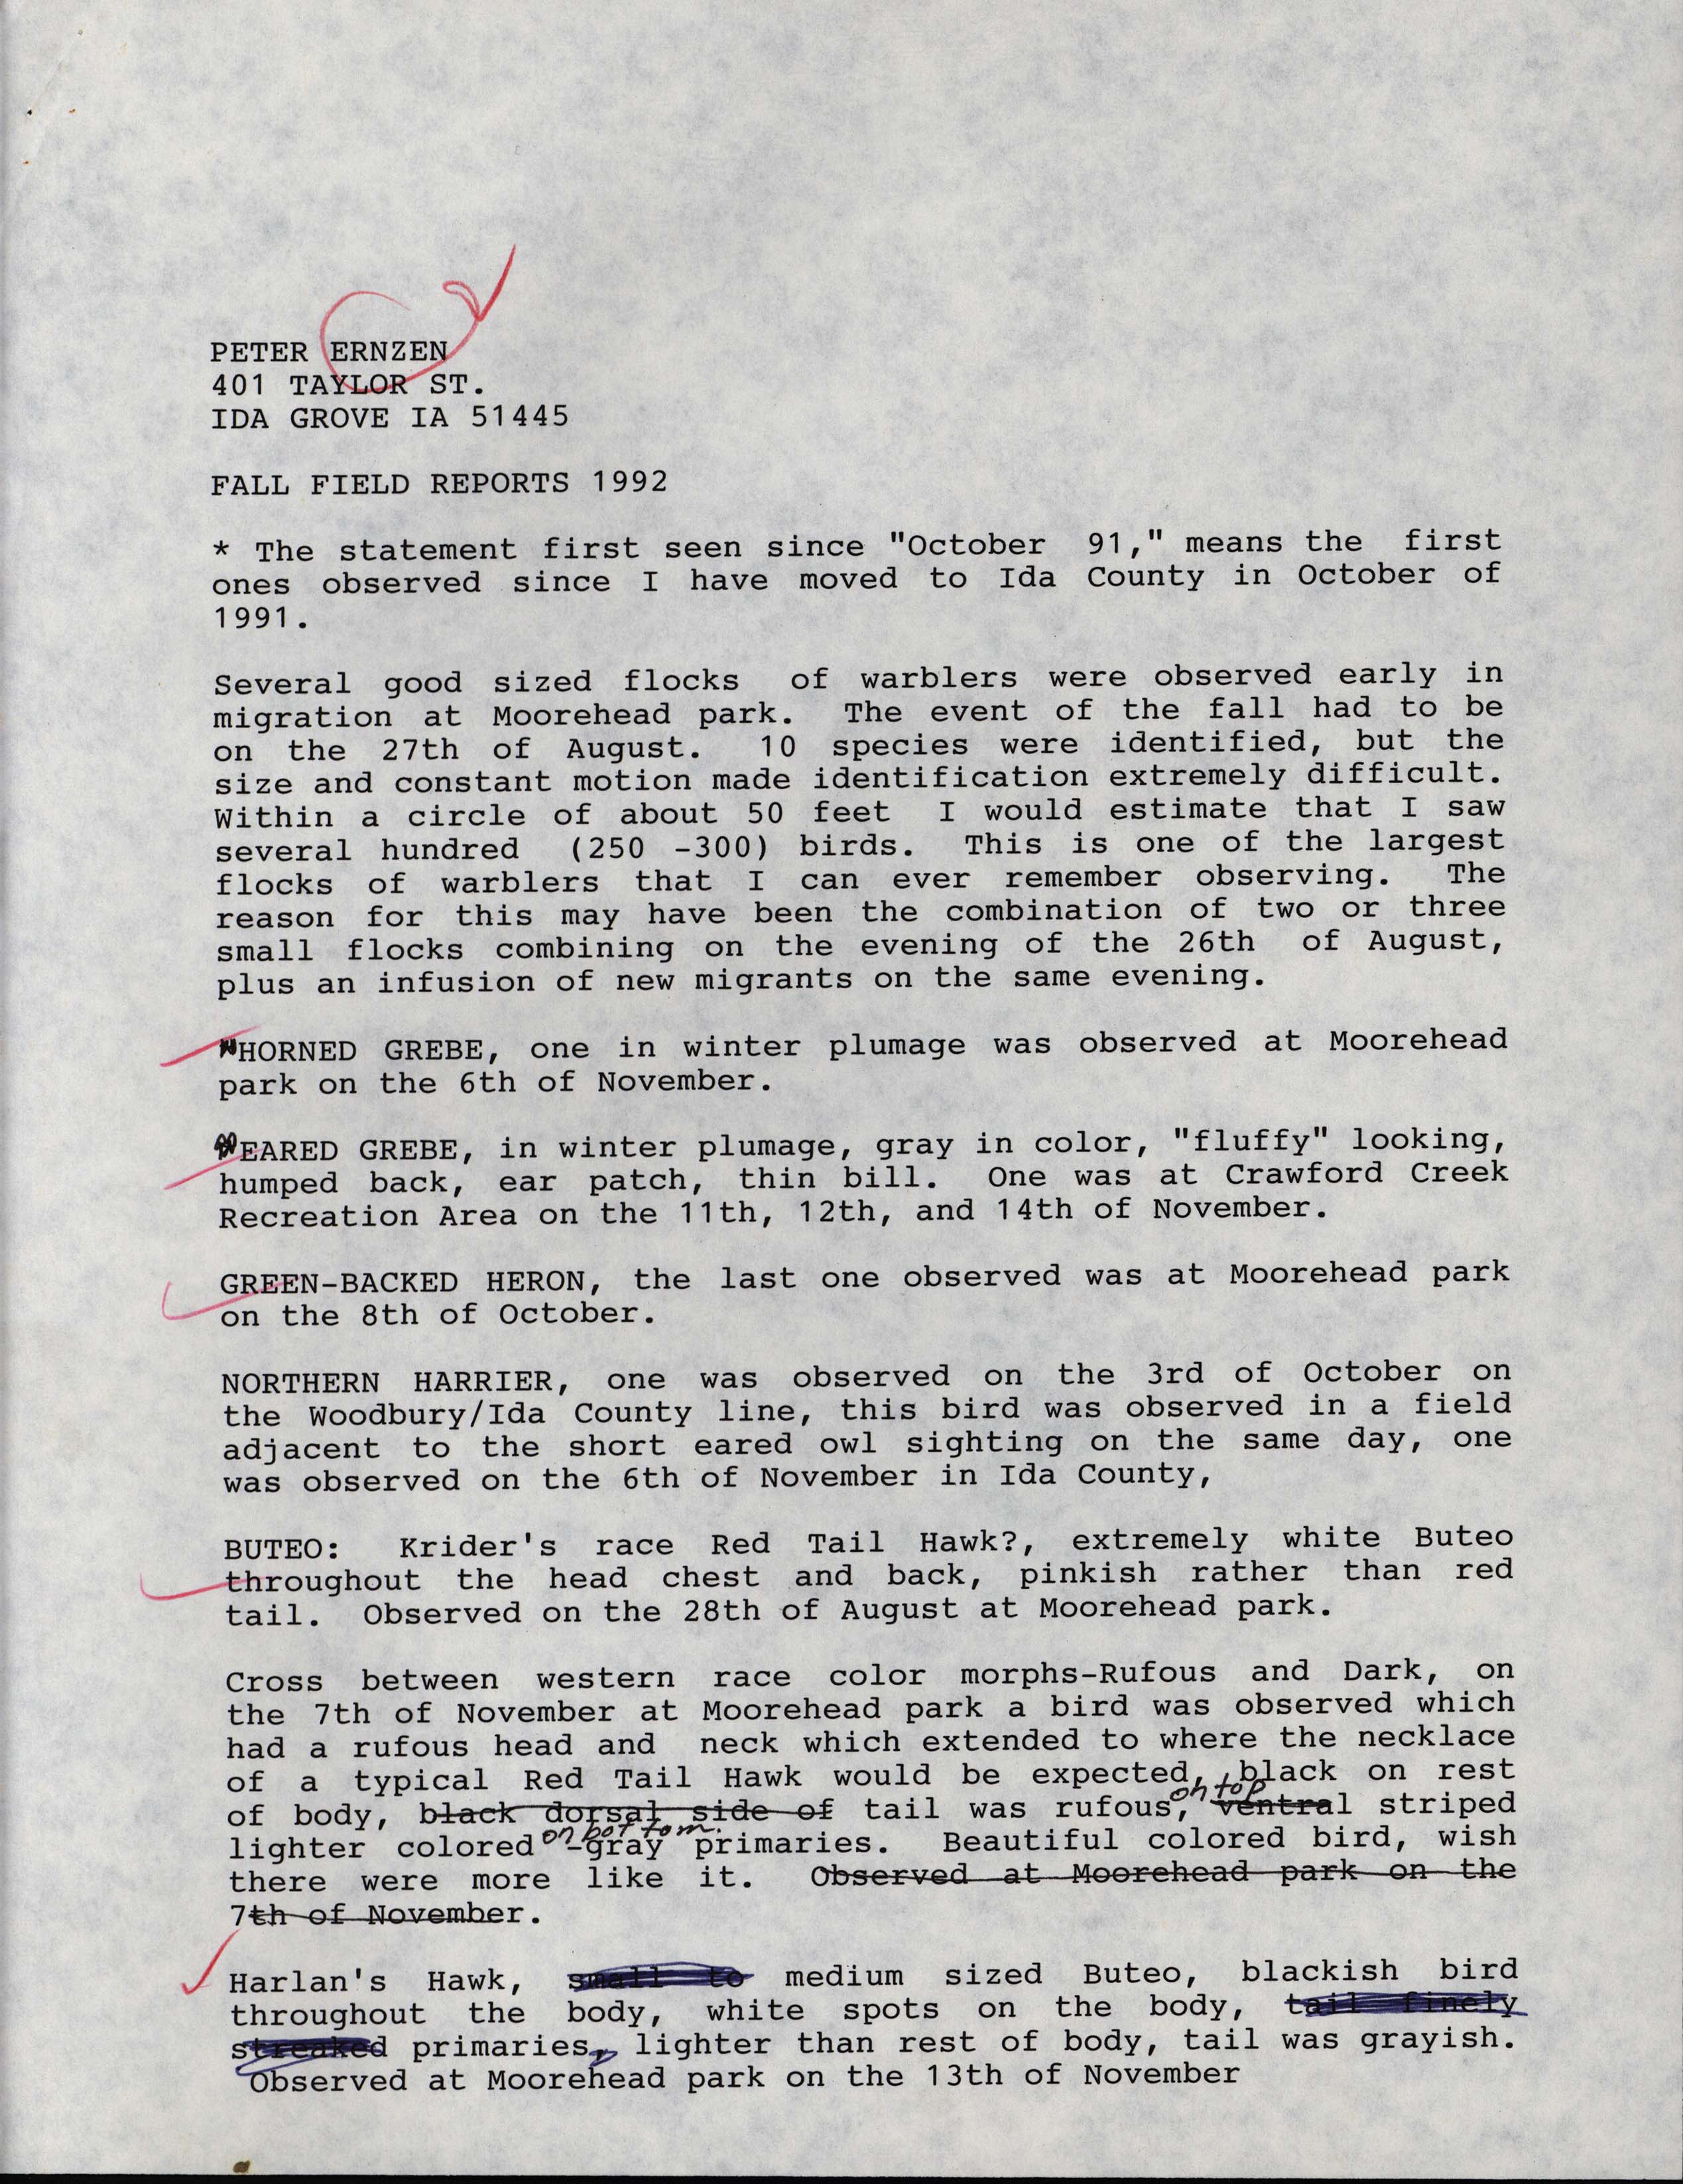 Field notes contributed by Peter Ernzen, fall 1992